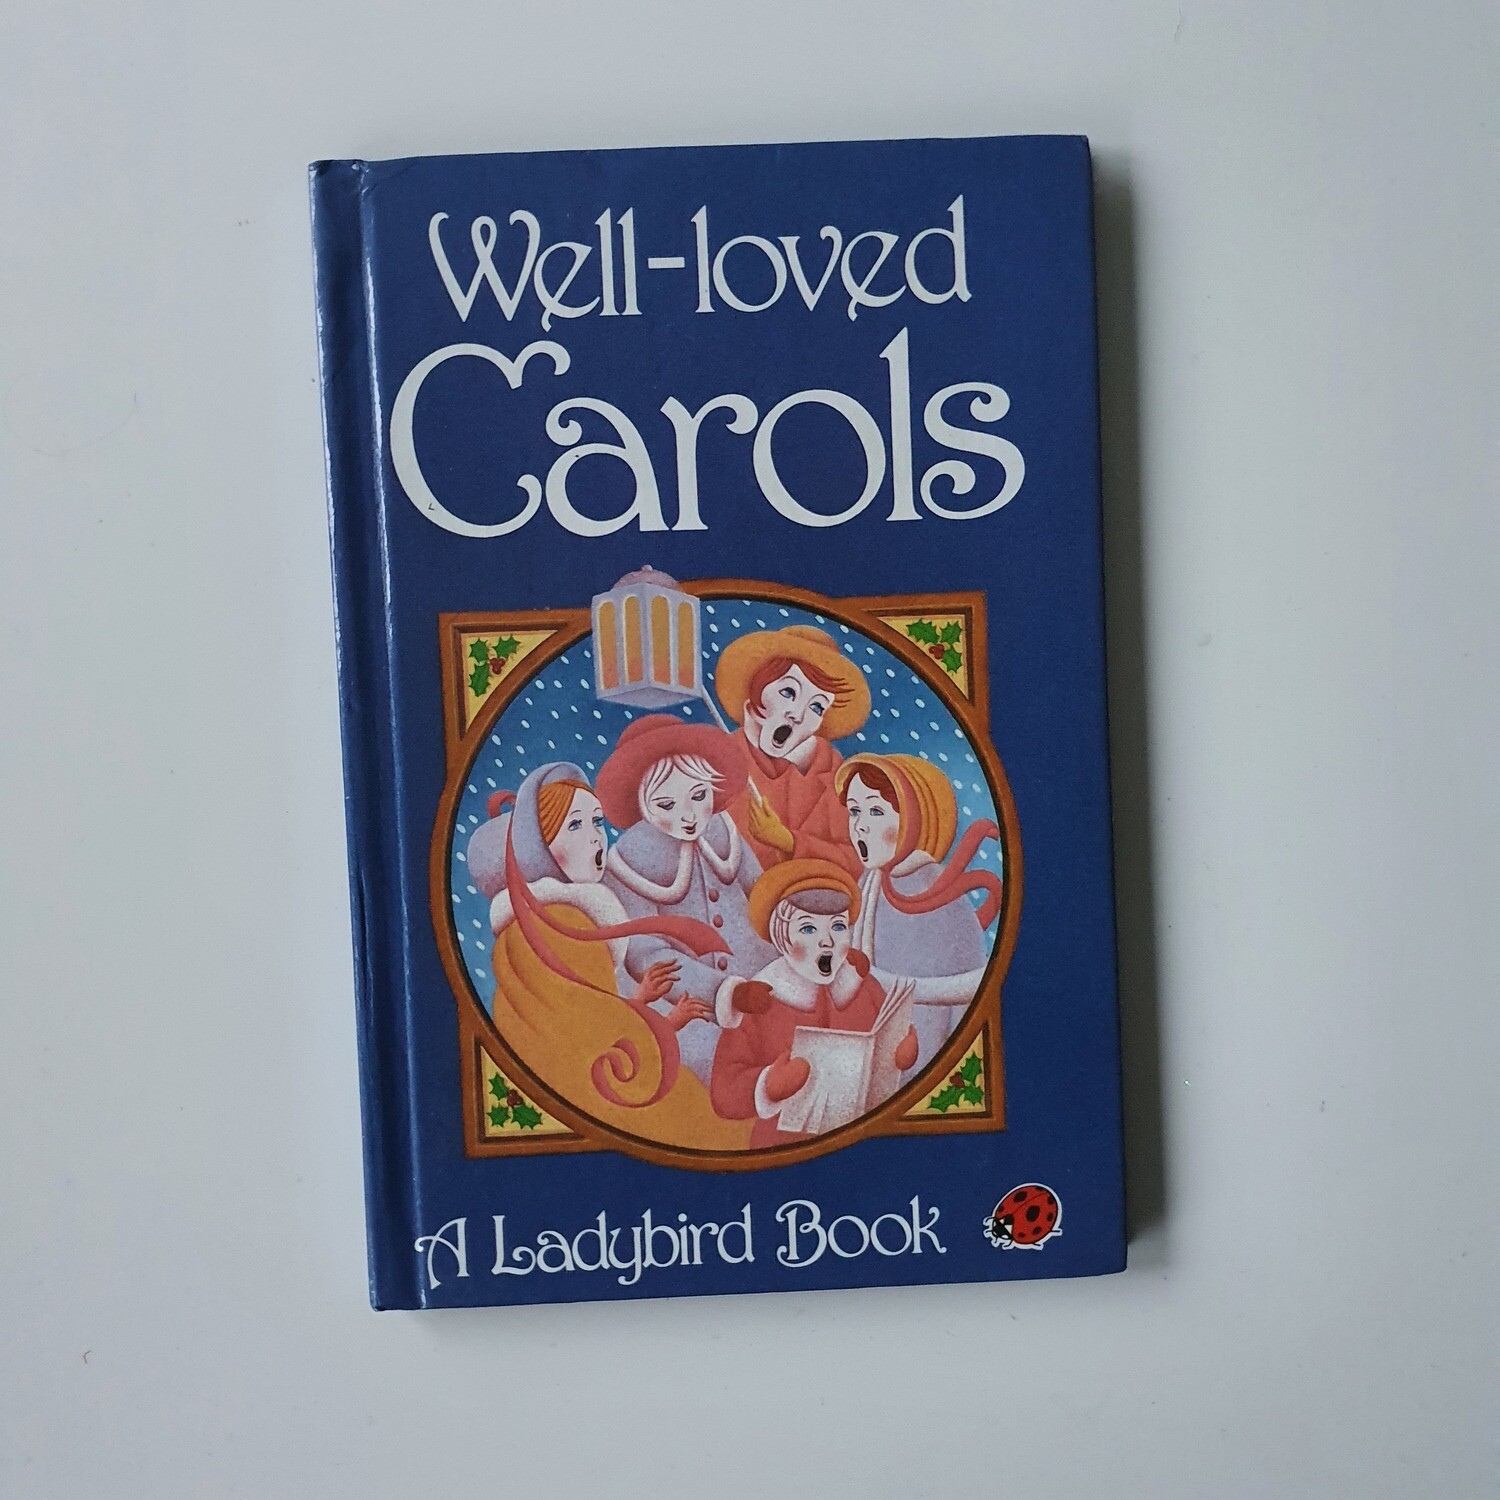 Well Loved Carols made from a ladybird book - Christmas